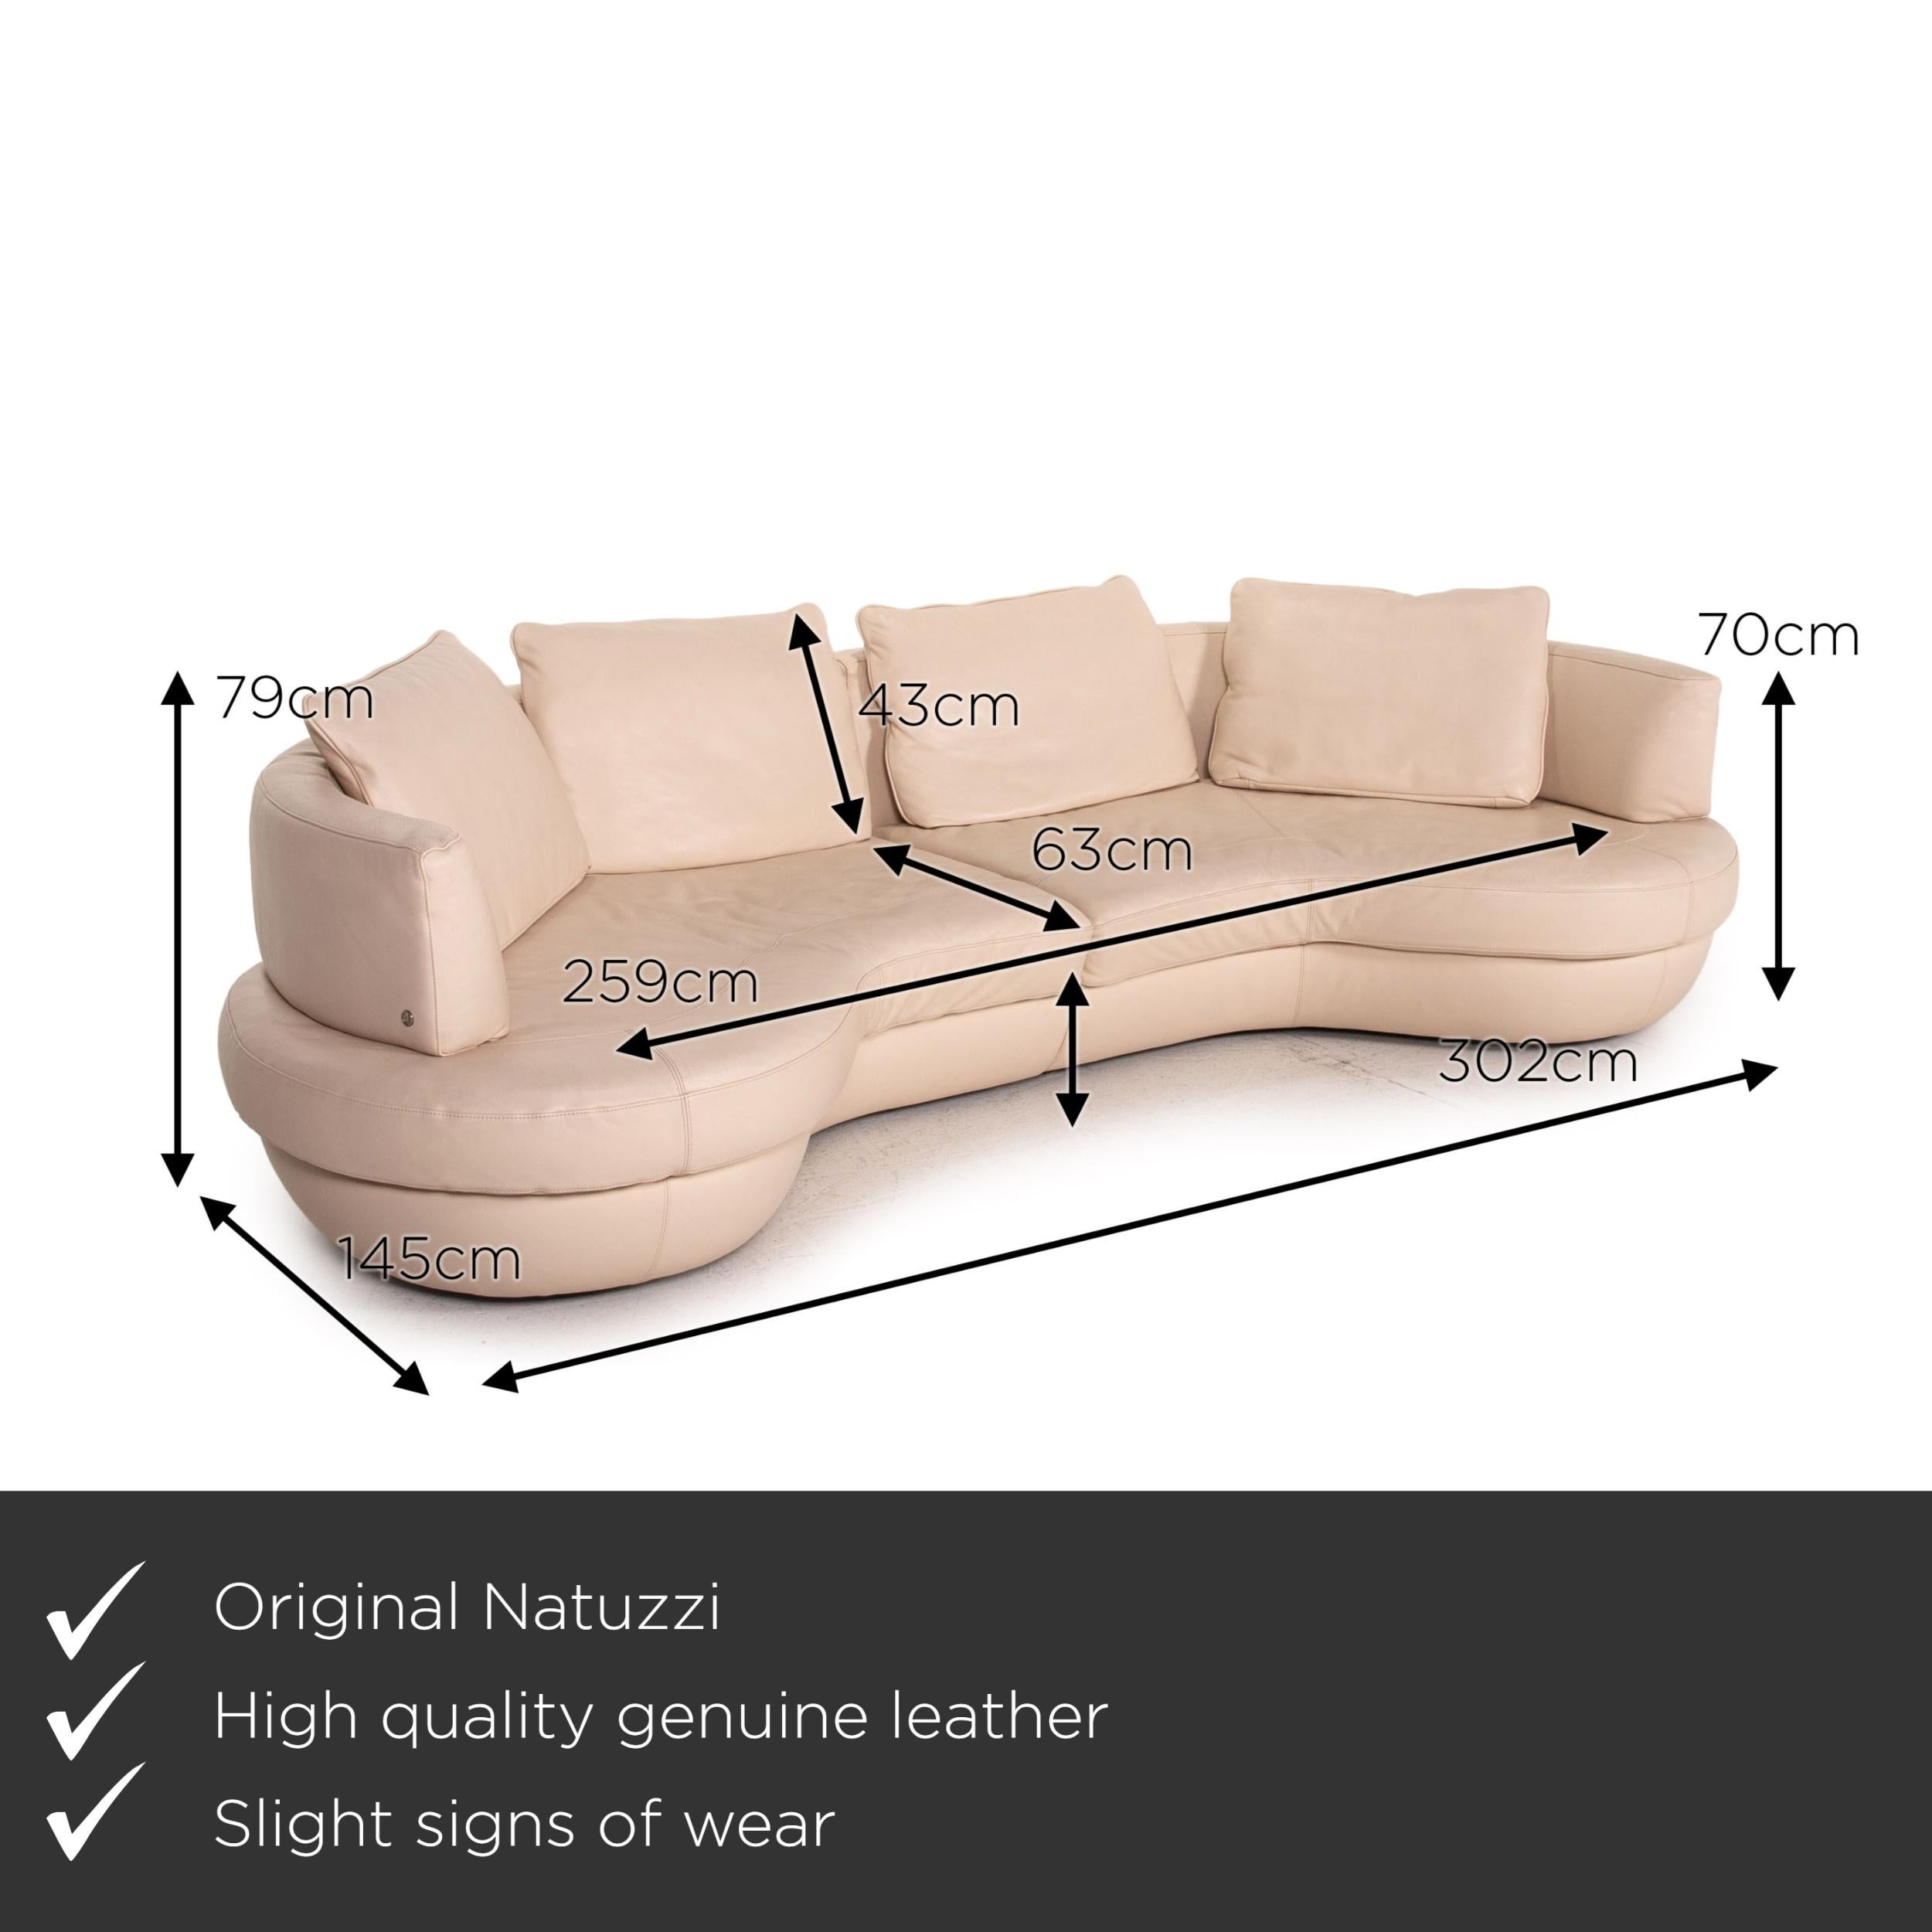 We present to you a Natuzzi leather corner sofa cream function sofa couch.


 Product measurements in centimeters:
 

Depth: 145
Width: 302
Height: 79
Seat height: 46
Rest height: 70
Seat depth: 63
Seat width: 259
Back height: 43.

 